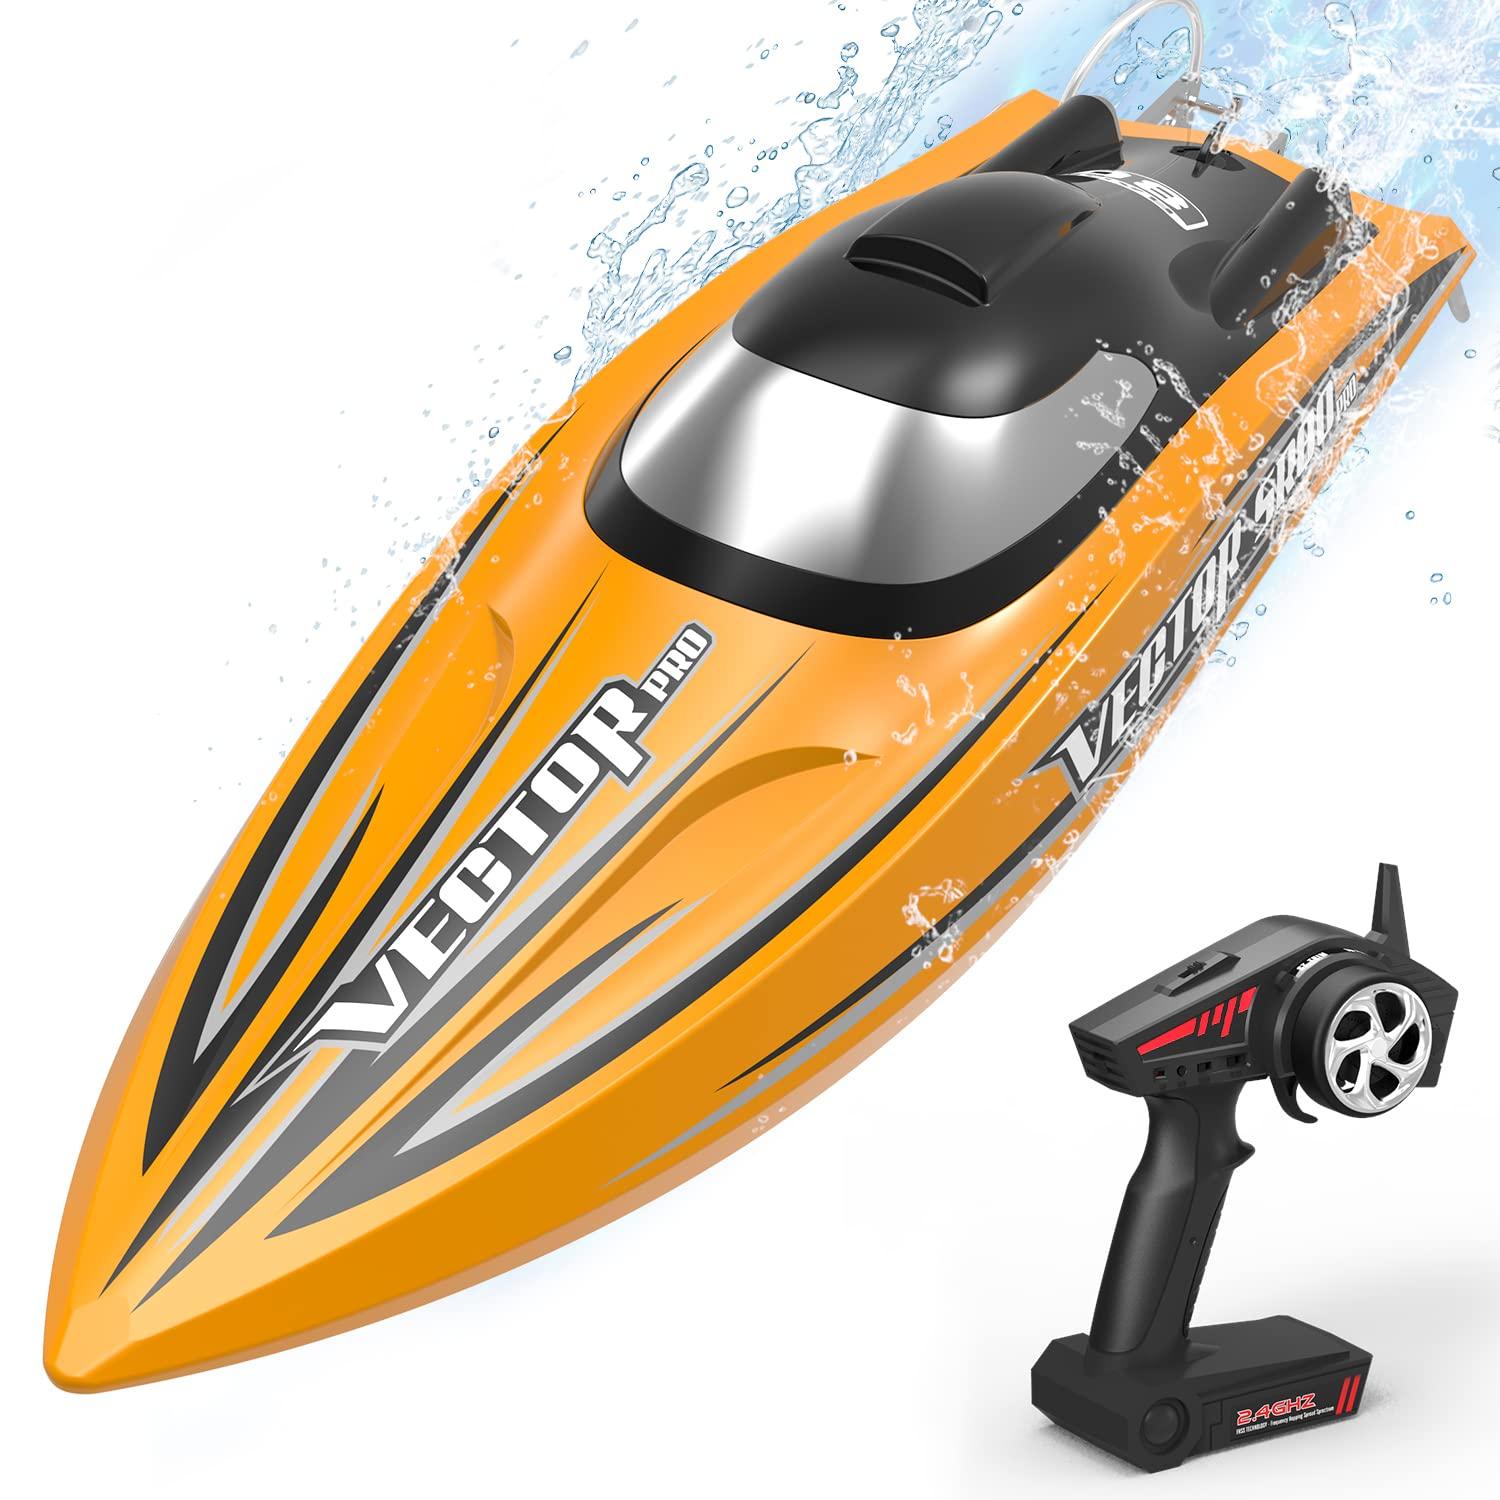 Fast Electric Rc Boats: Choosing the Perfect Fast Electric RC Boat